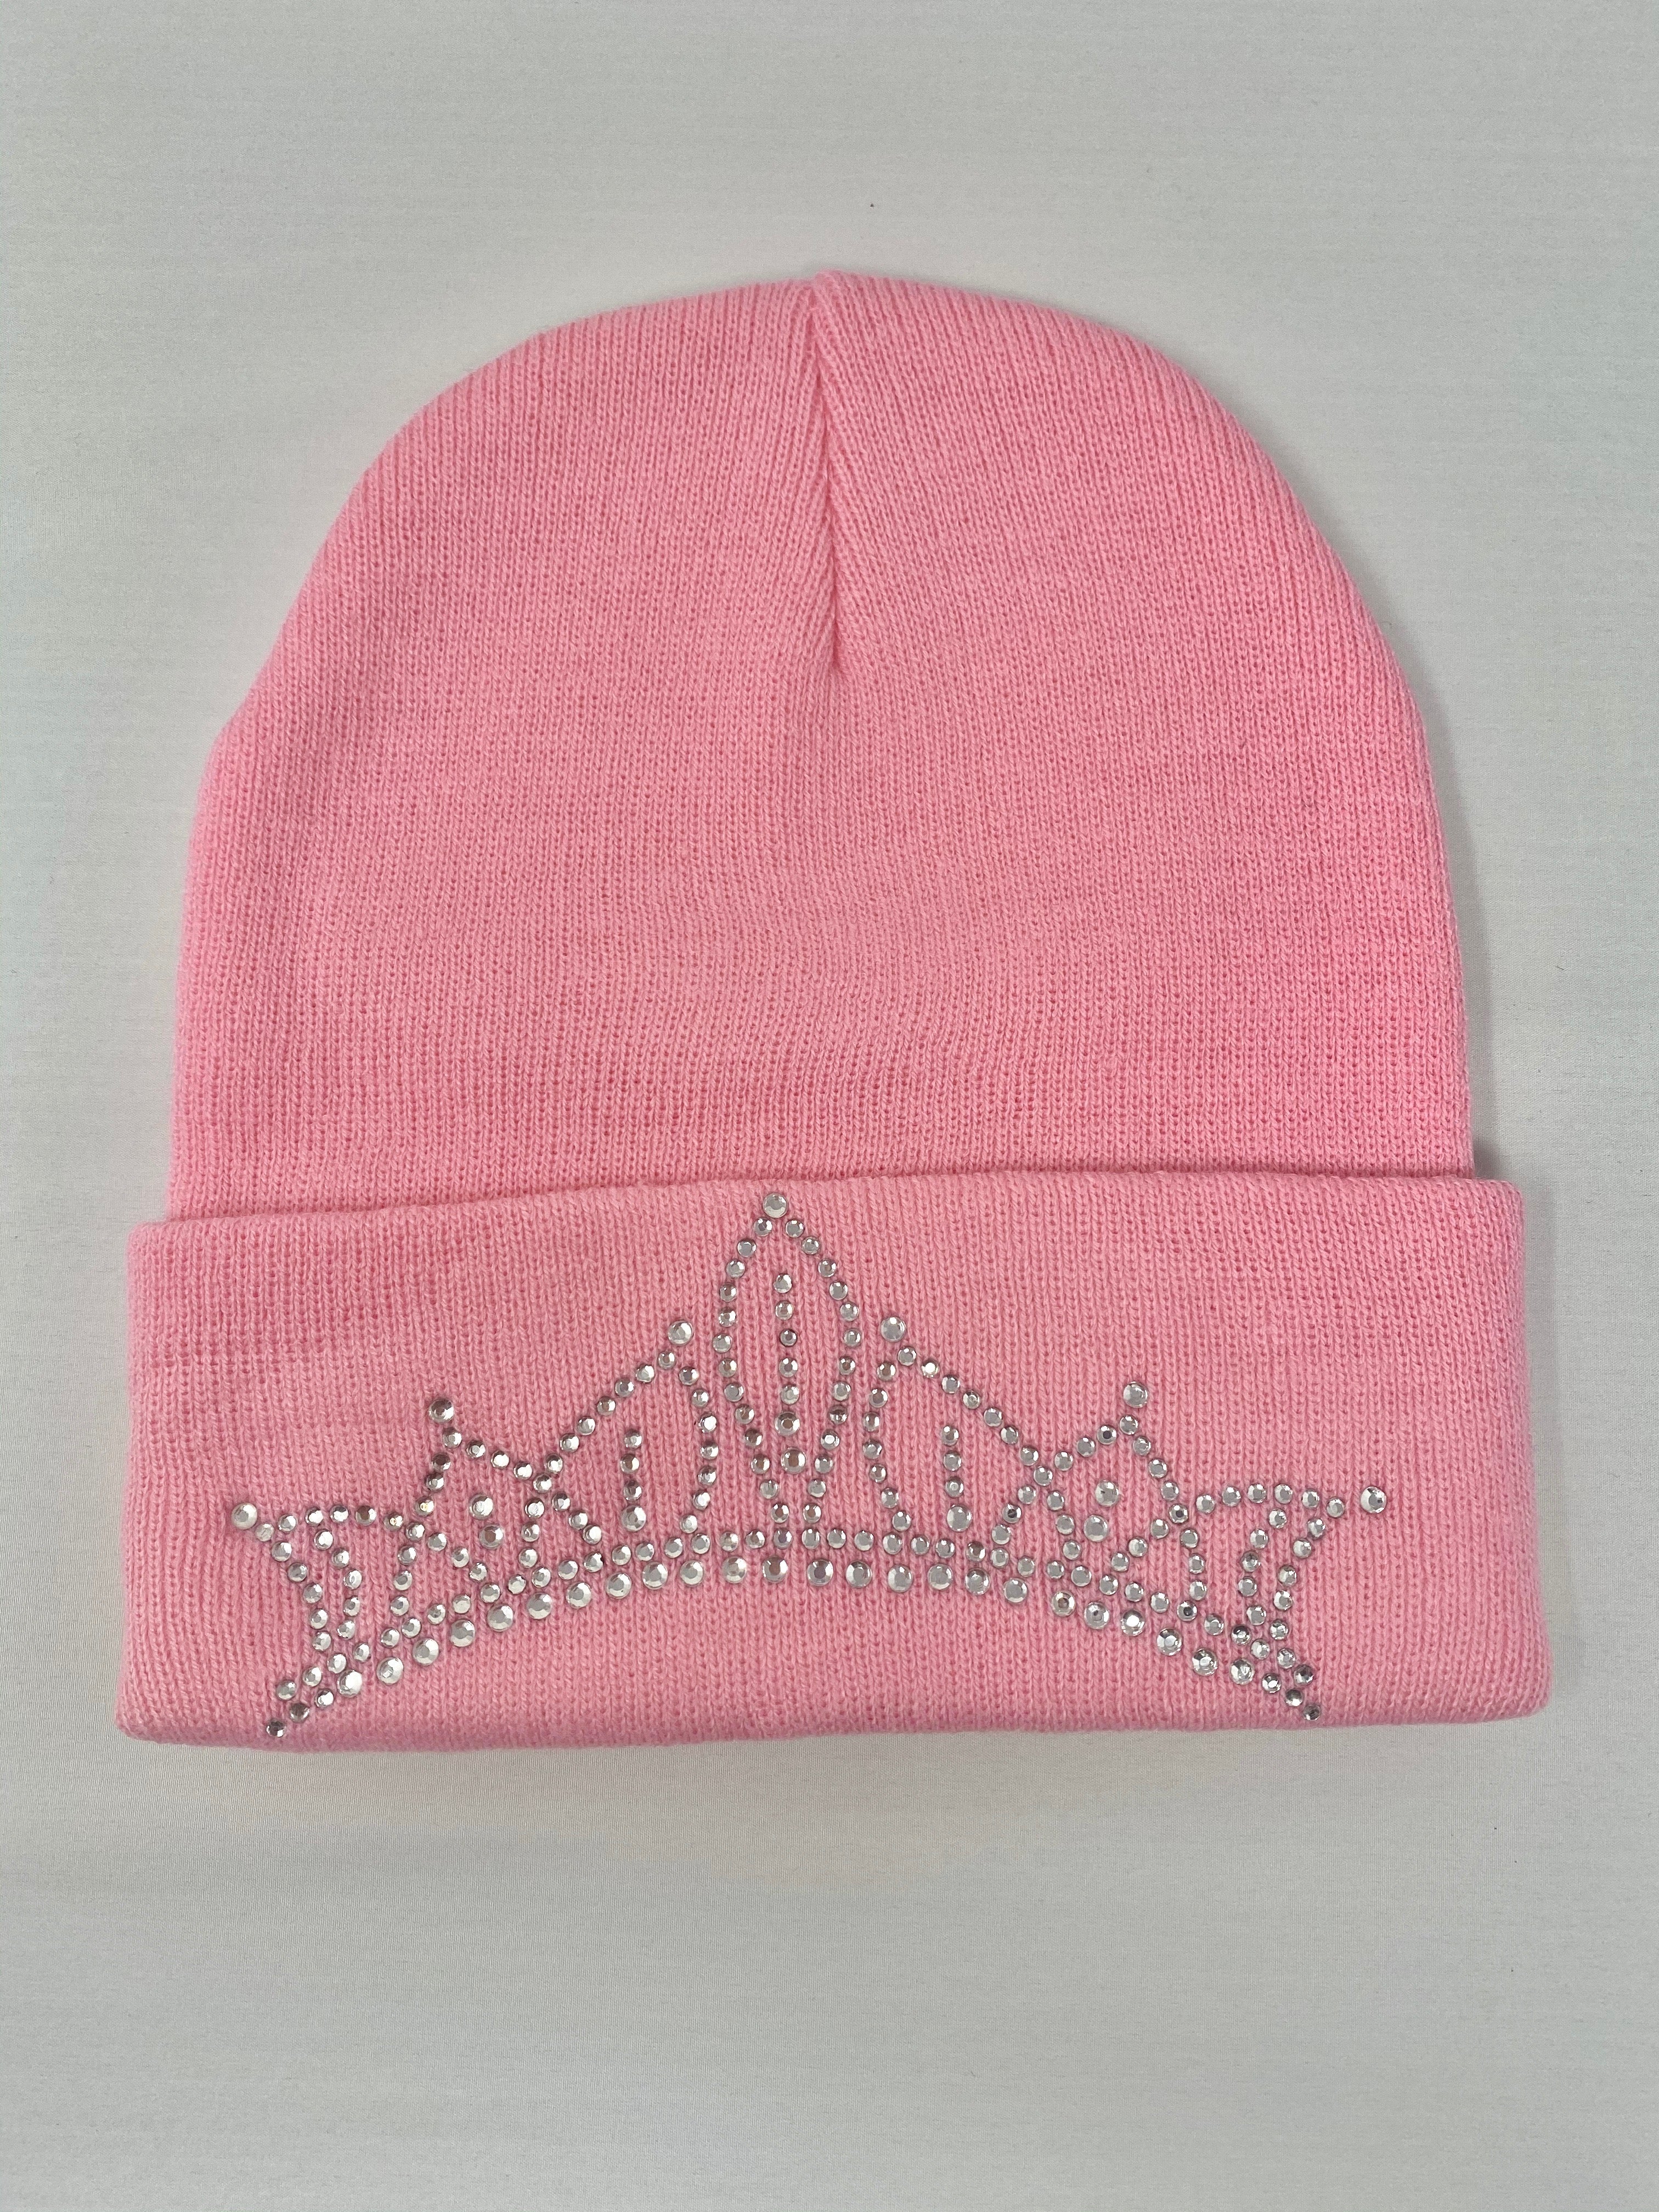 Knit Beanie with Large Silver Crown